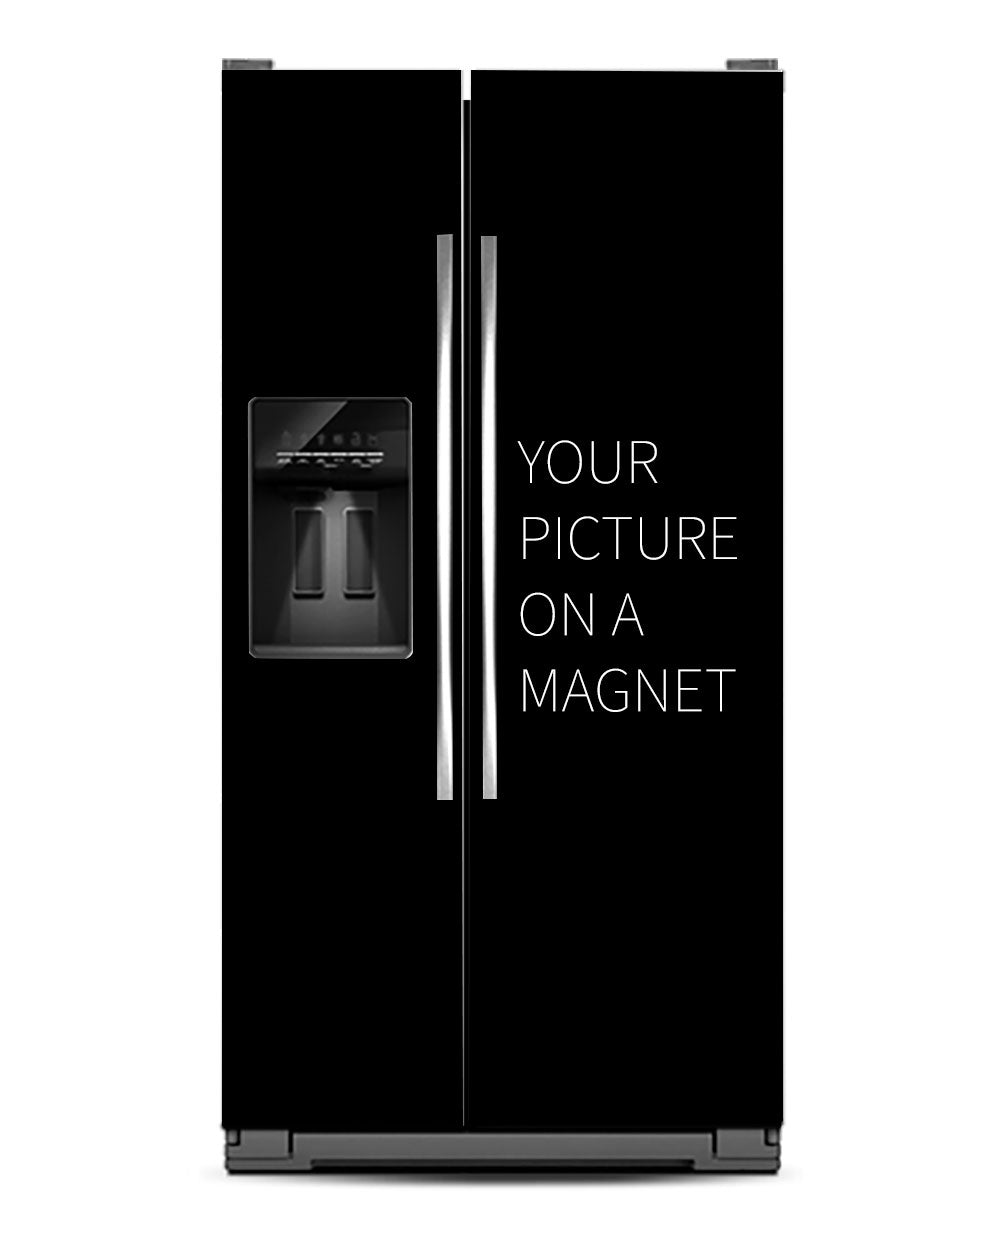 Magnetic Paradise Island Refrigerator Cover Skin 